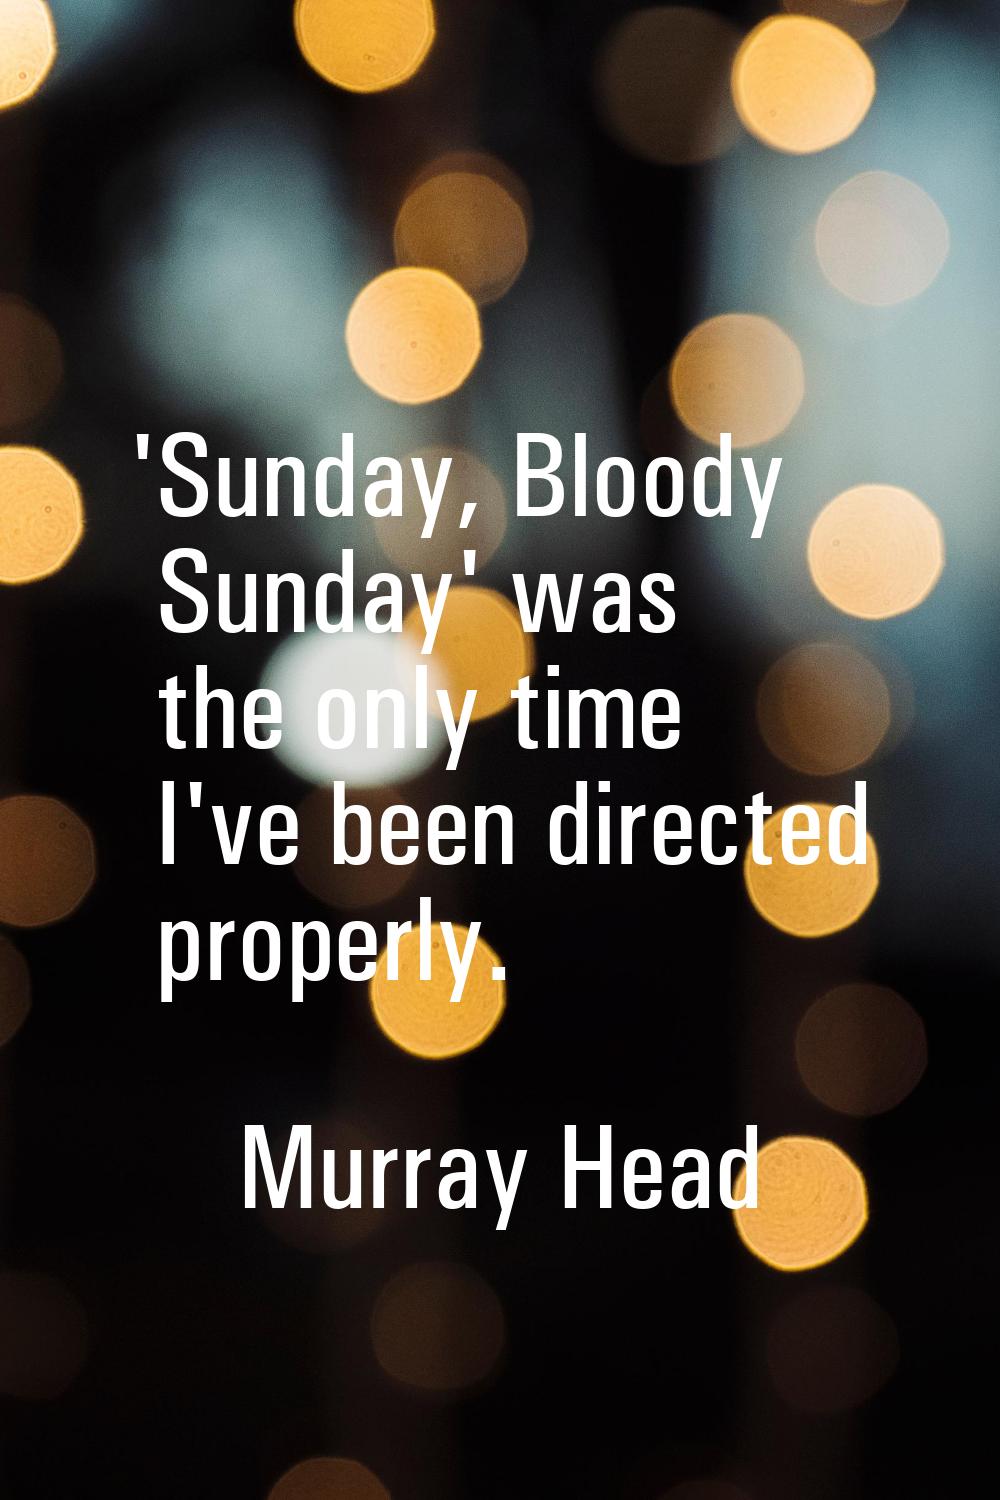 'Sunday, Bloody Sunday' was the only time I've been directed properly.